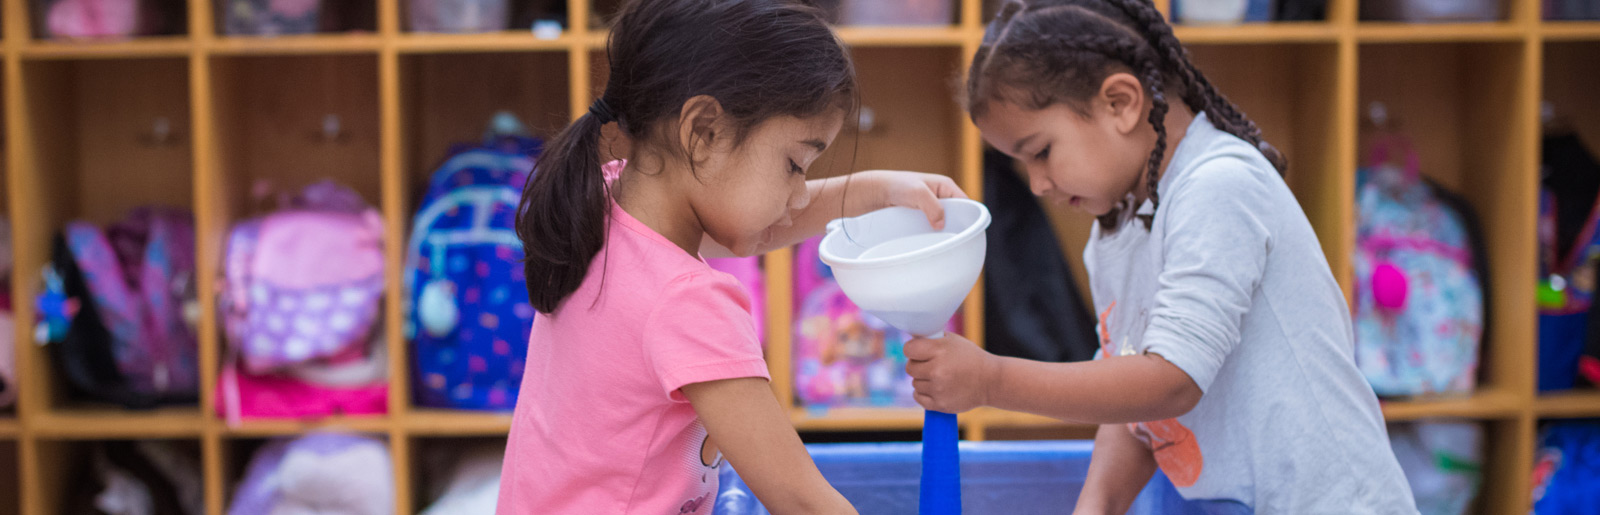 two girls use a plastic funnel in an activity